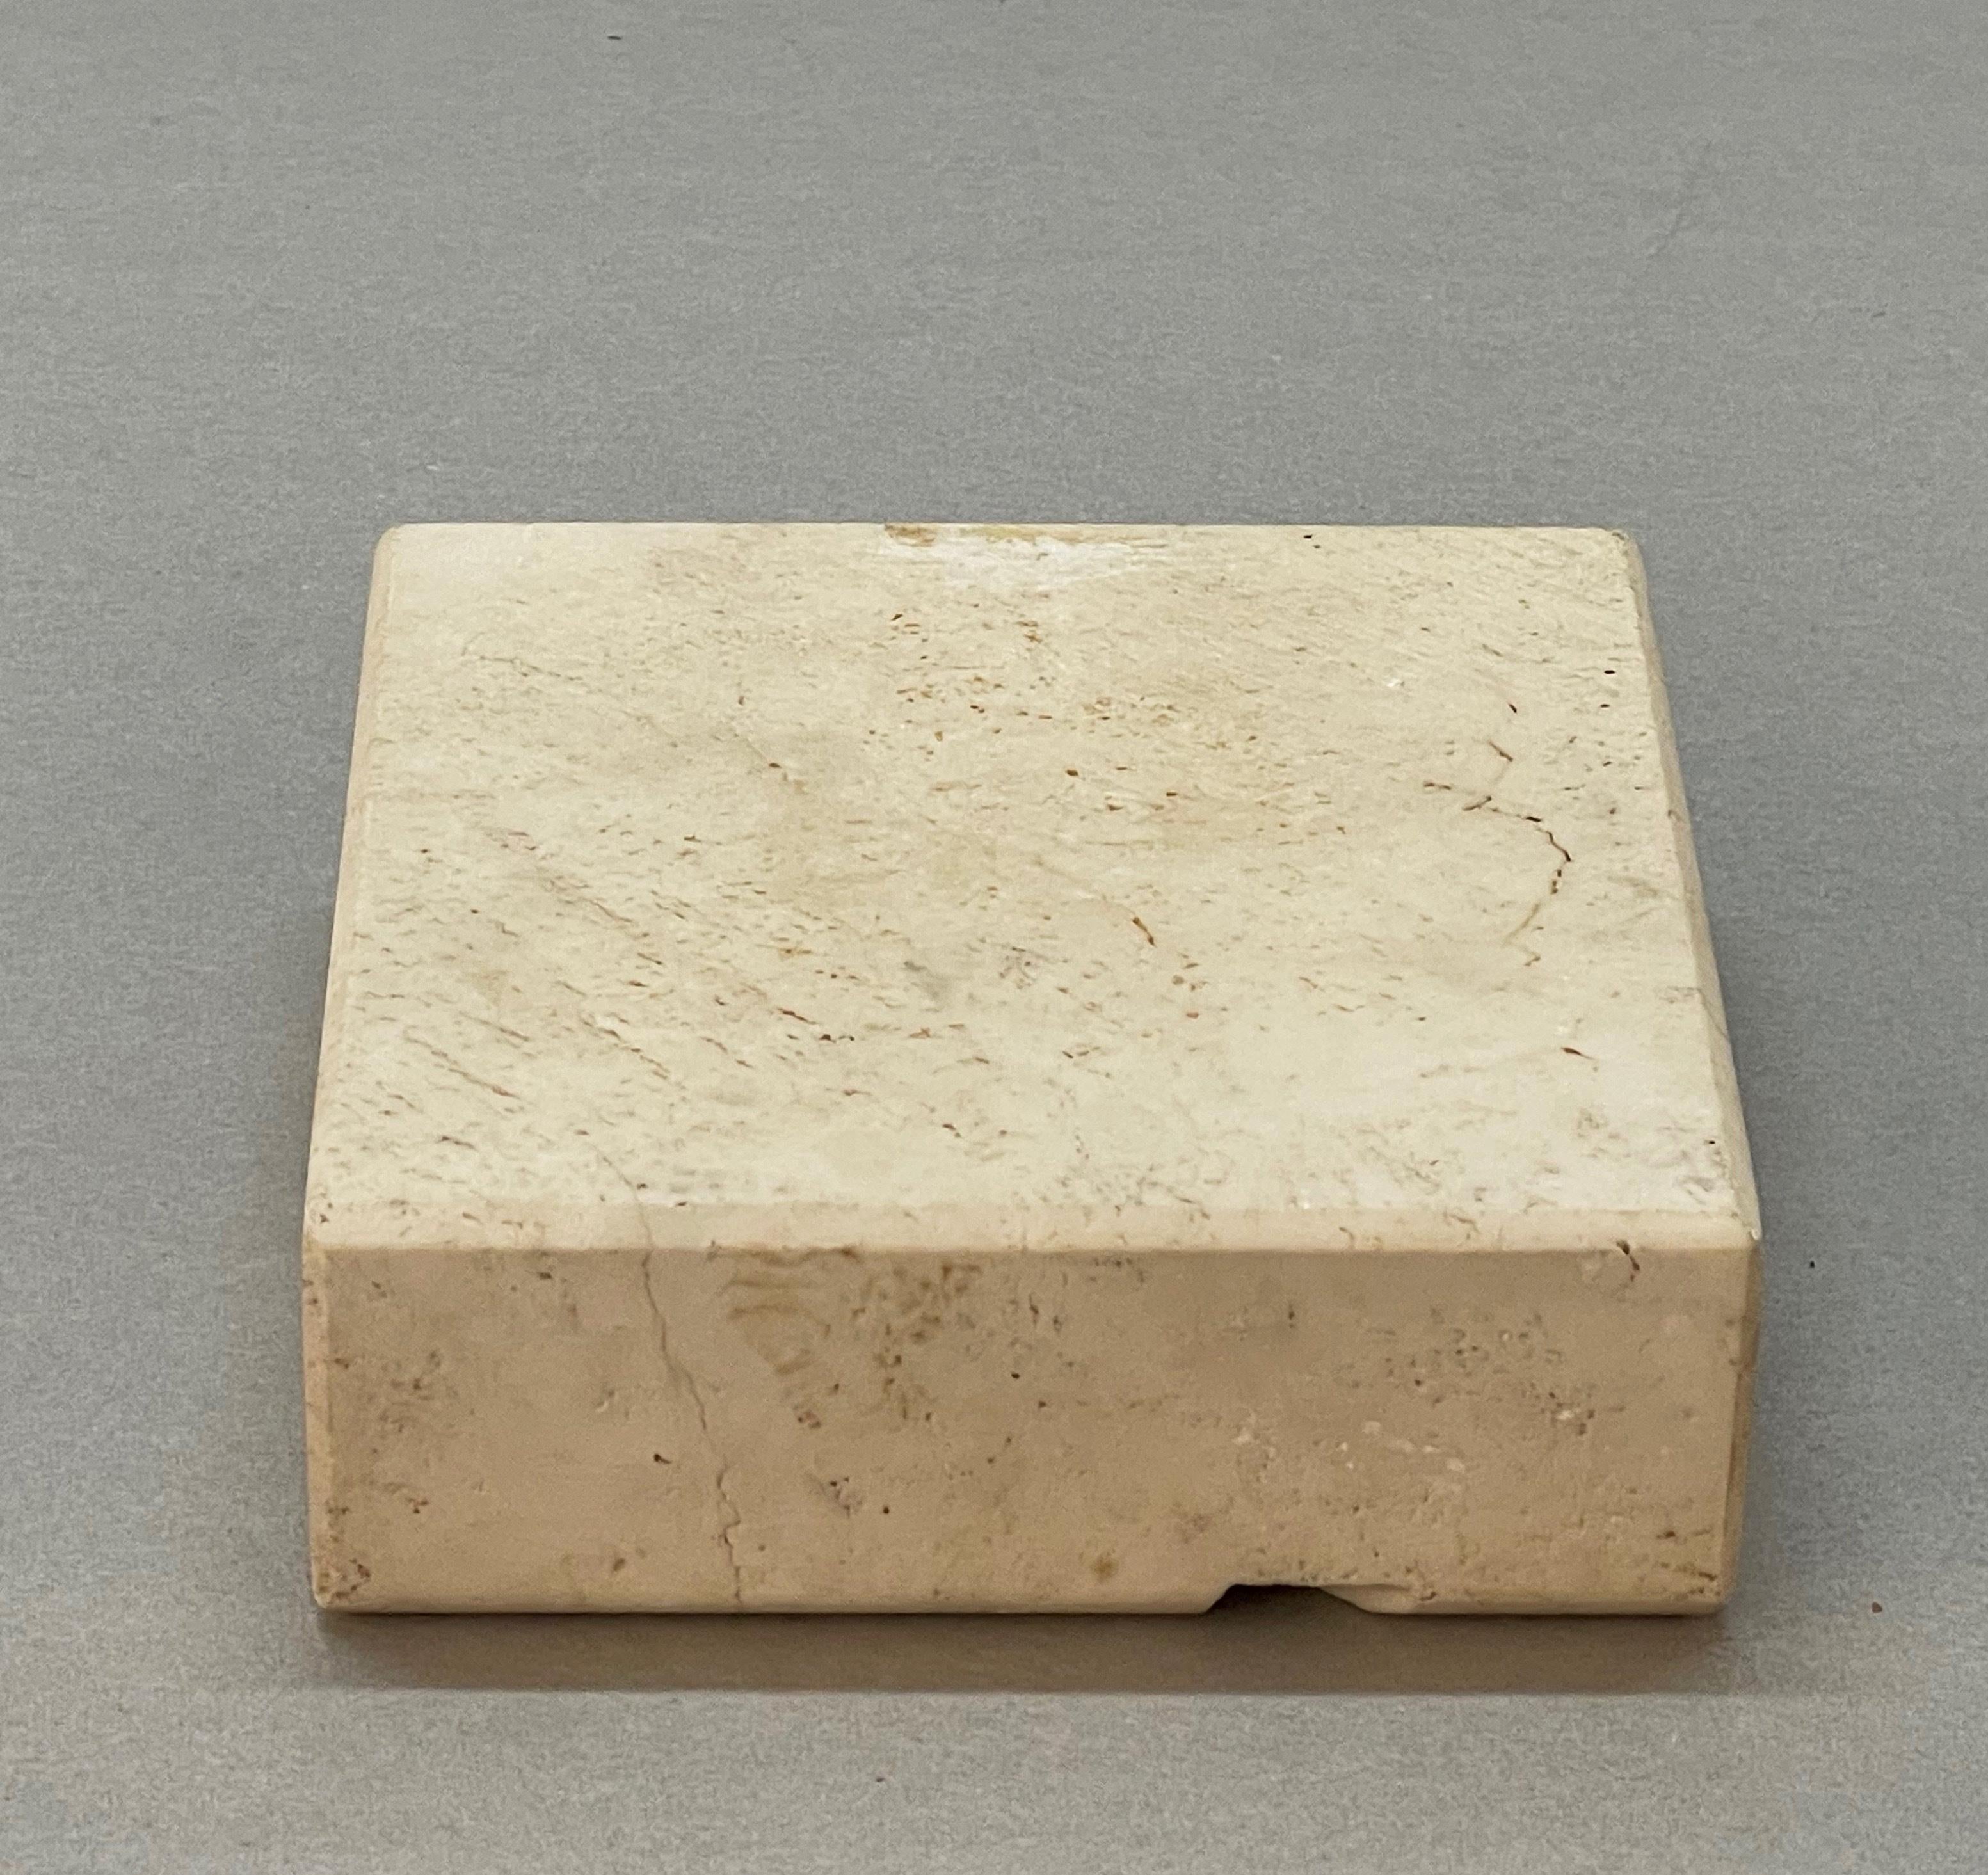 Midcentury Squared White Travertine Marble Italian Ashtray After Mannelli, 1970s For Sale 8